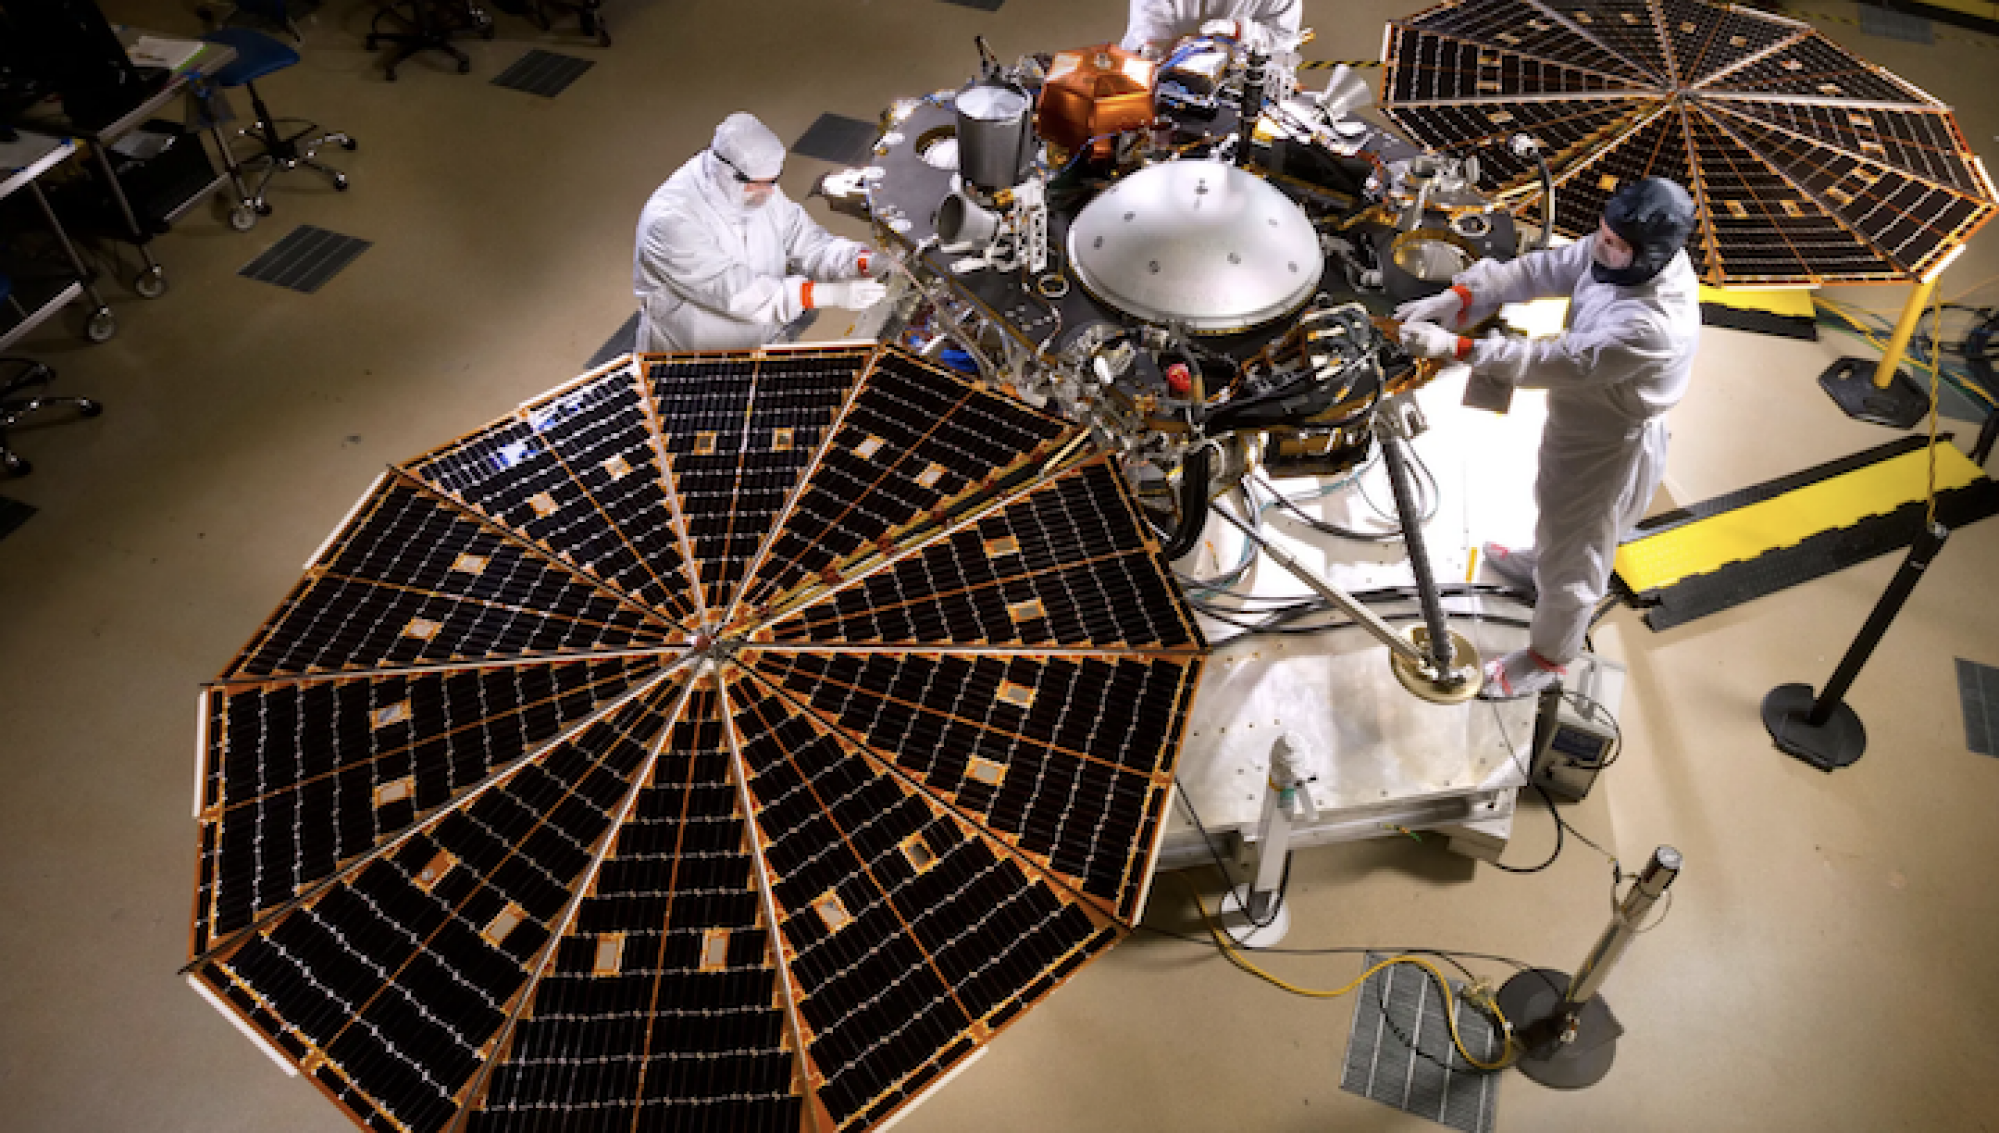 The InSight lander's solar panels deployed during testing in 2015.